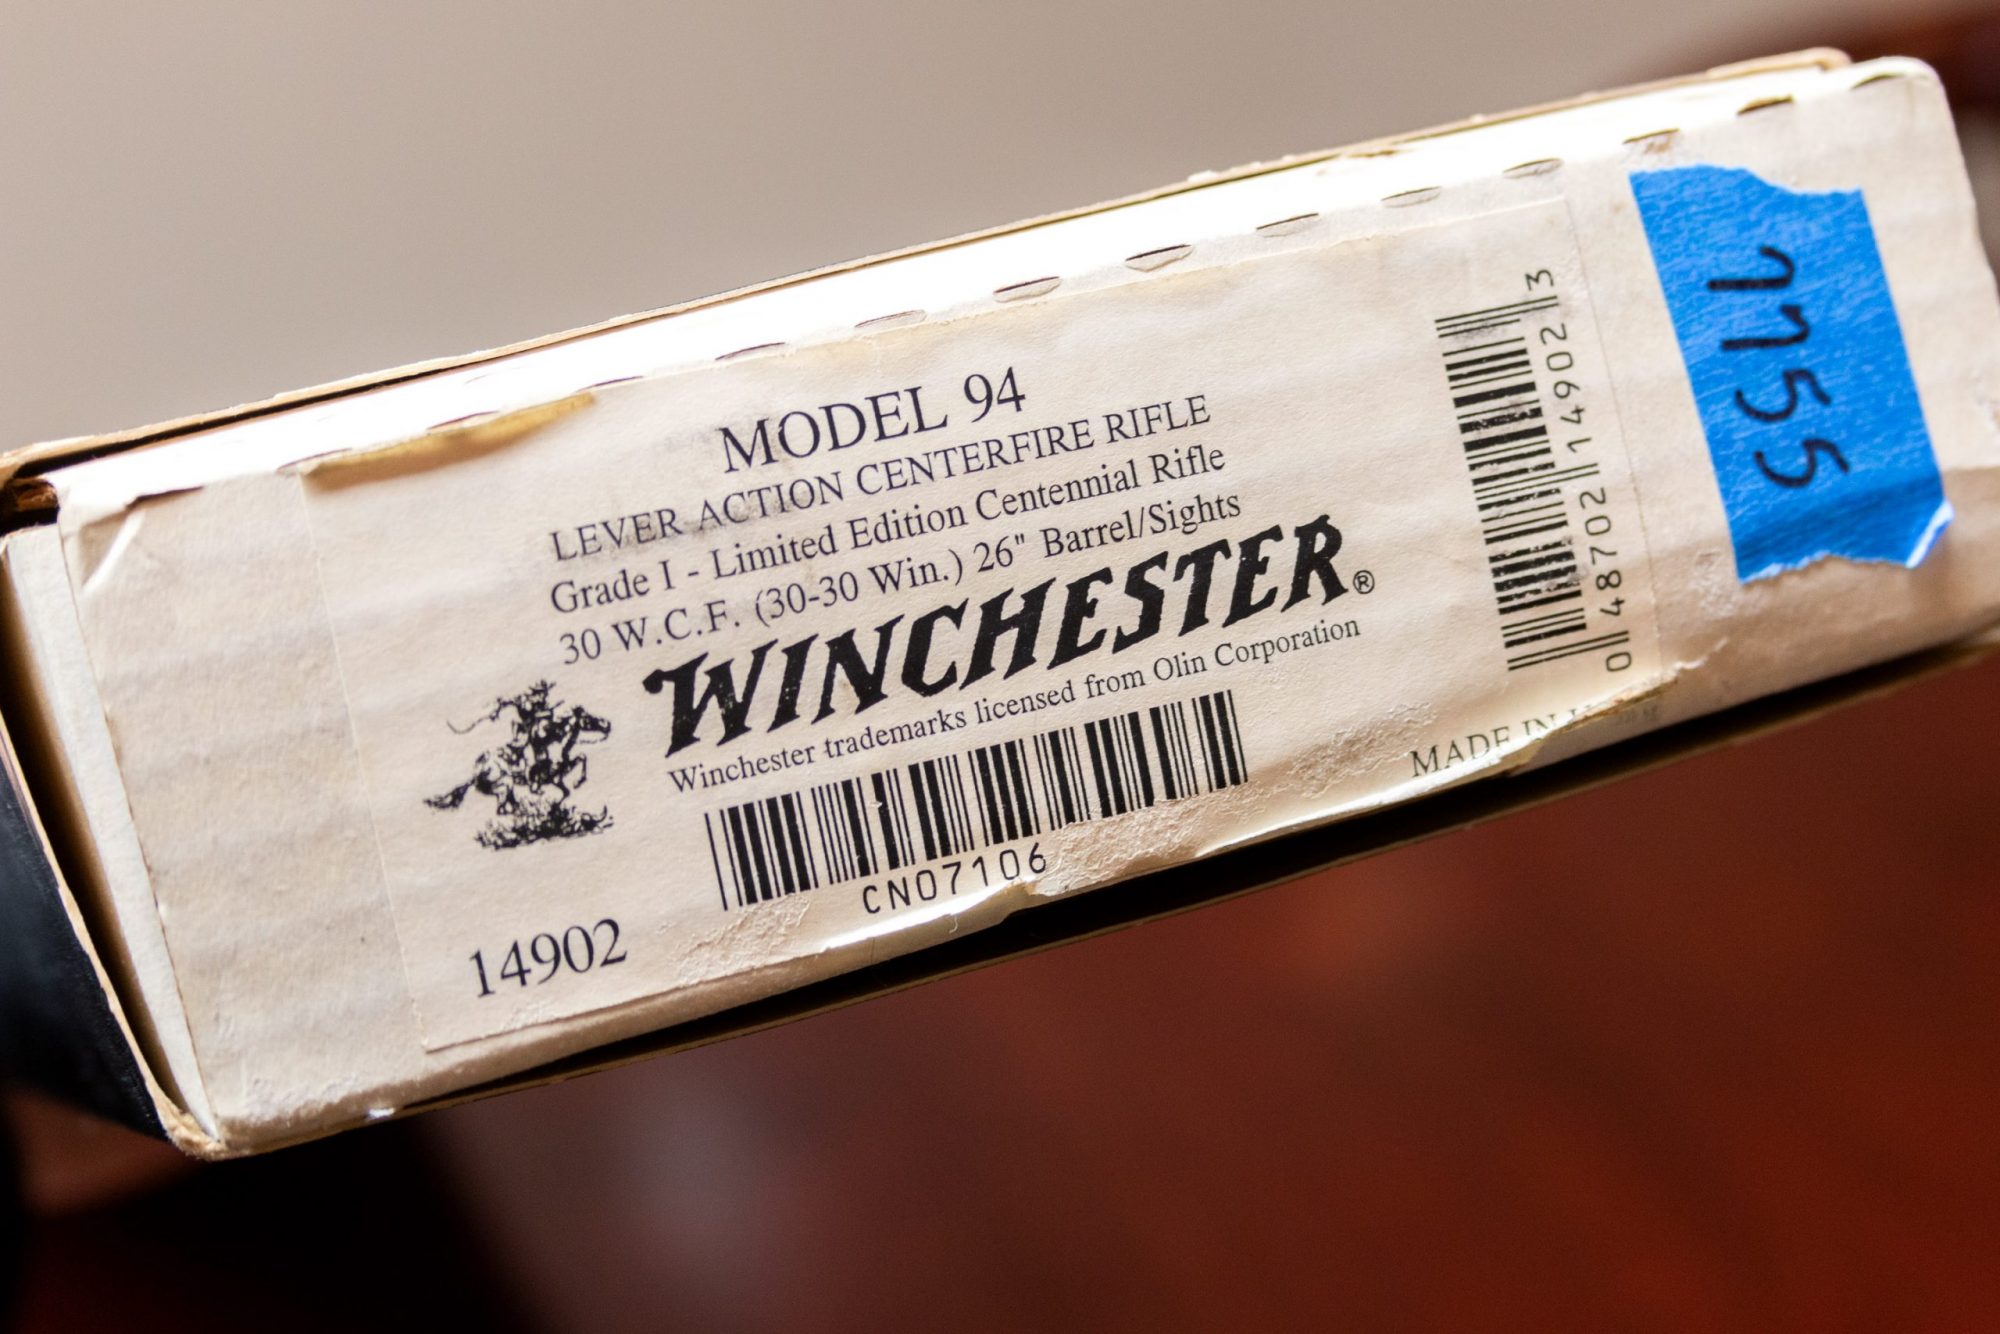 Photo of a pre-owned Winchester Model 94 Limited Edition Grade I Centennial Rifle, box